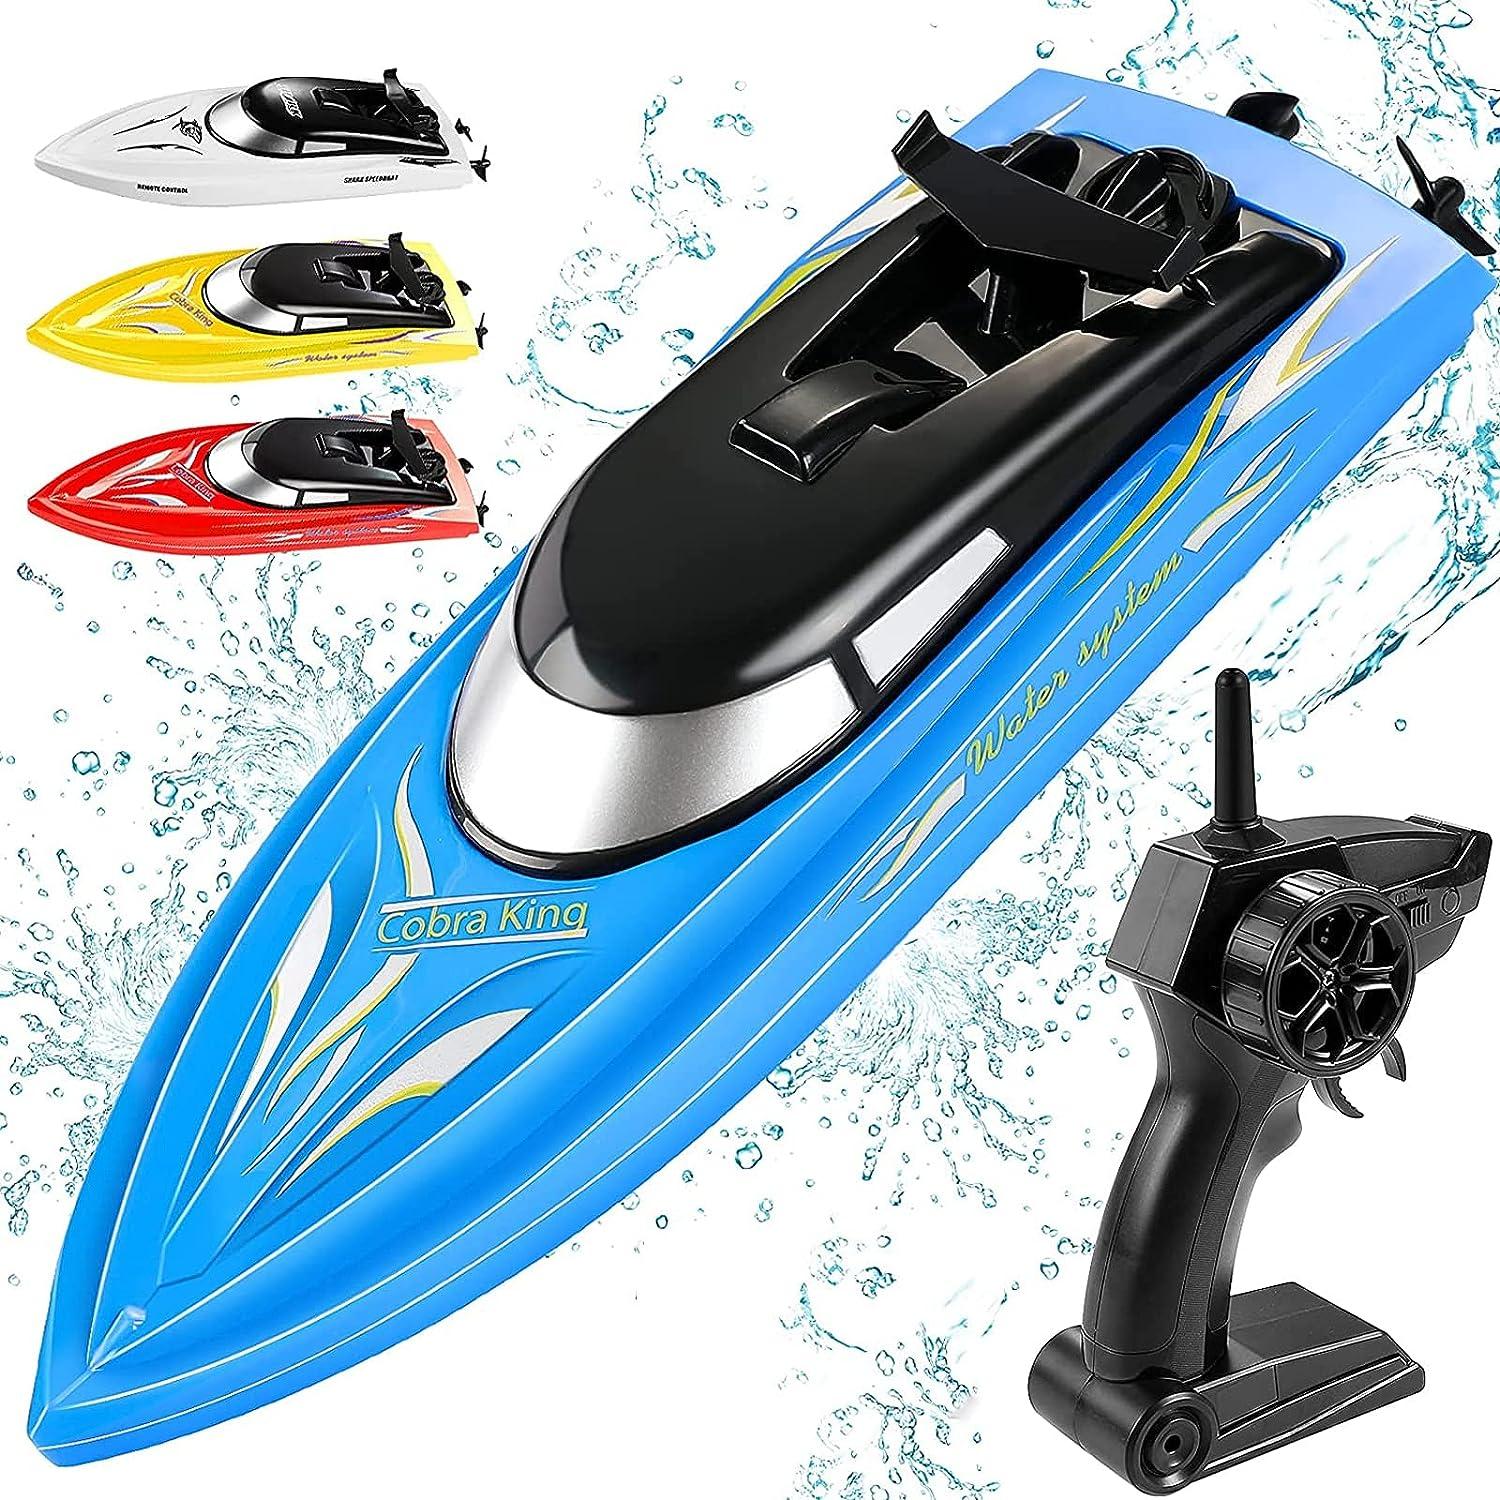 Rc Boat Online Store:  Why Online RC Boat Stores Offer the Best Customer Service